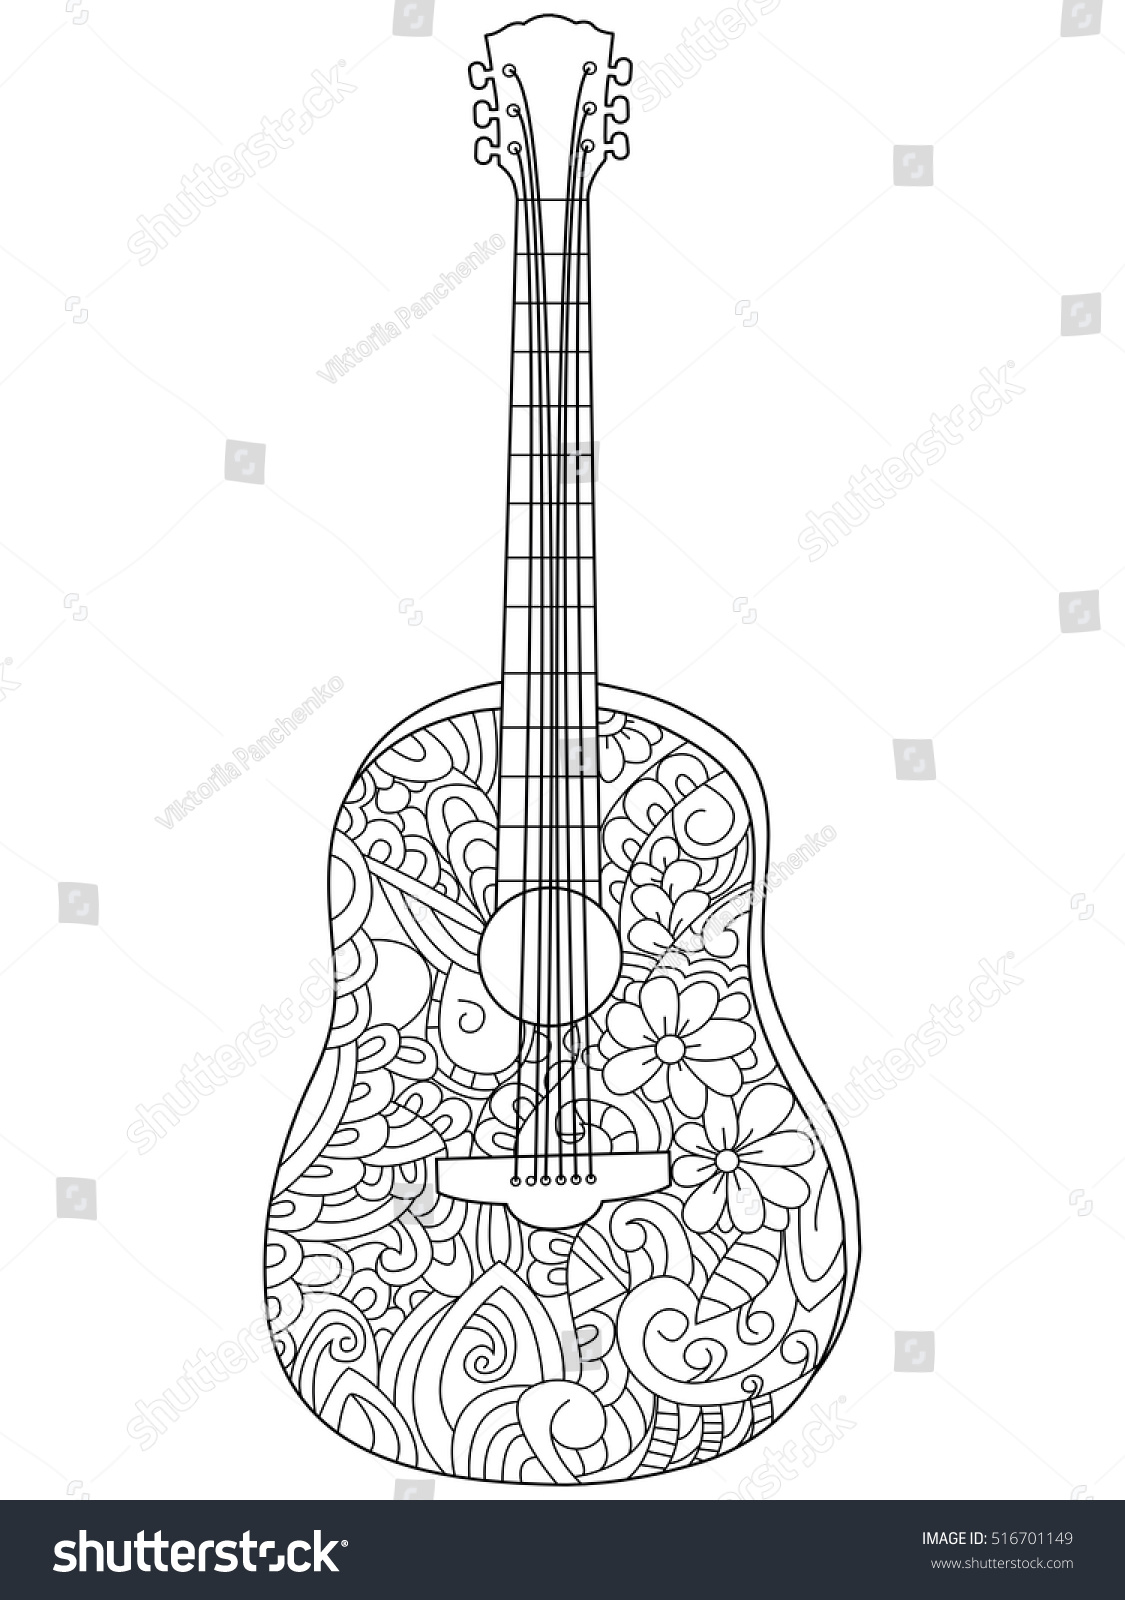 Musical instrument guitar coloring book for adults vector illustration Anti stress coloring for adult